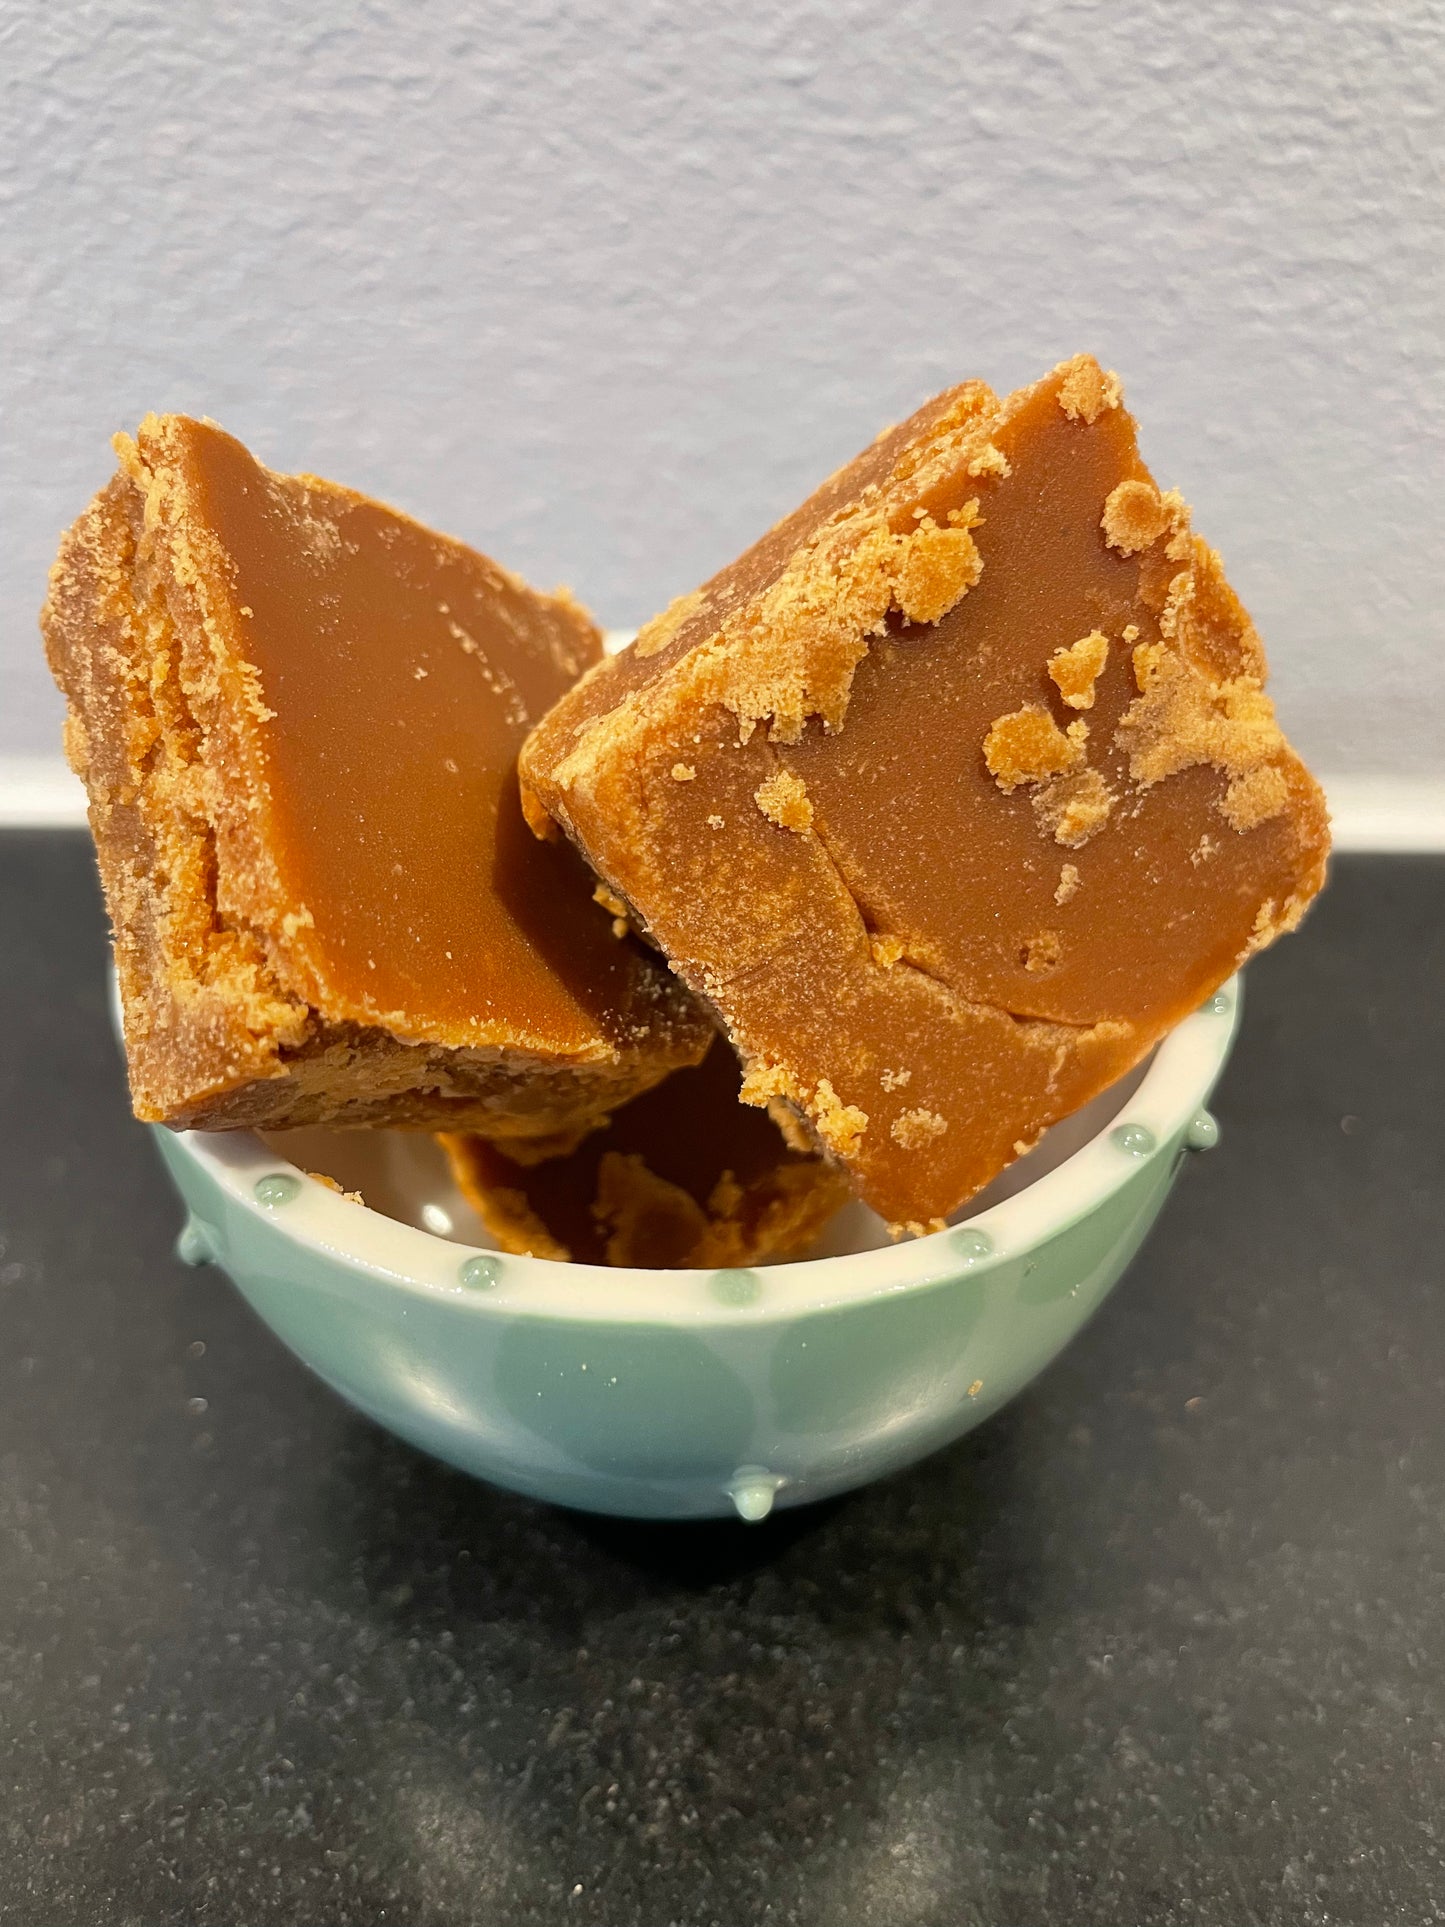 Fudge caramel. Three flavours. Handmade in South Africa